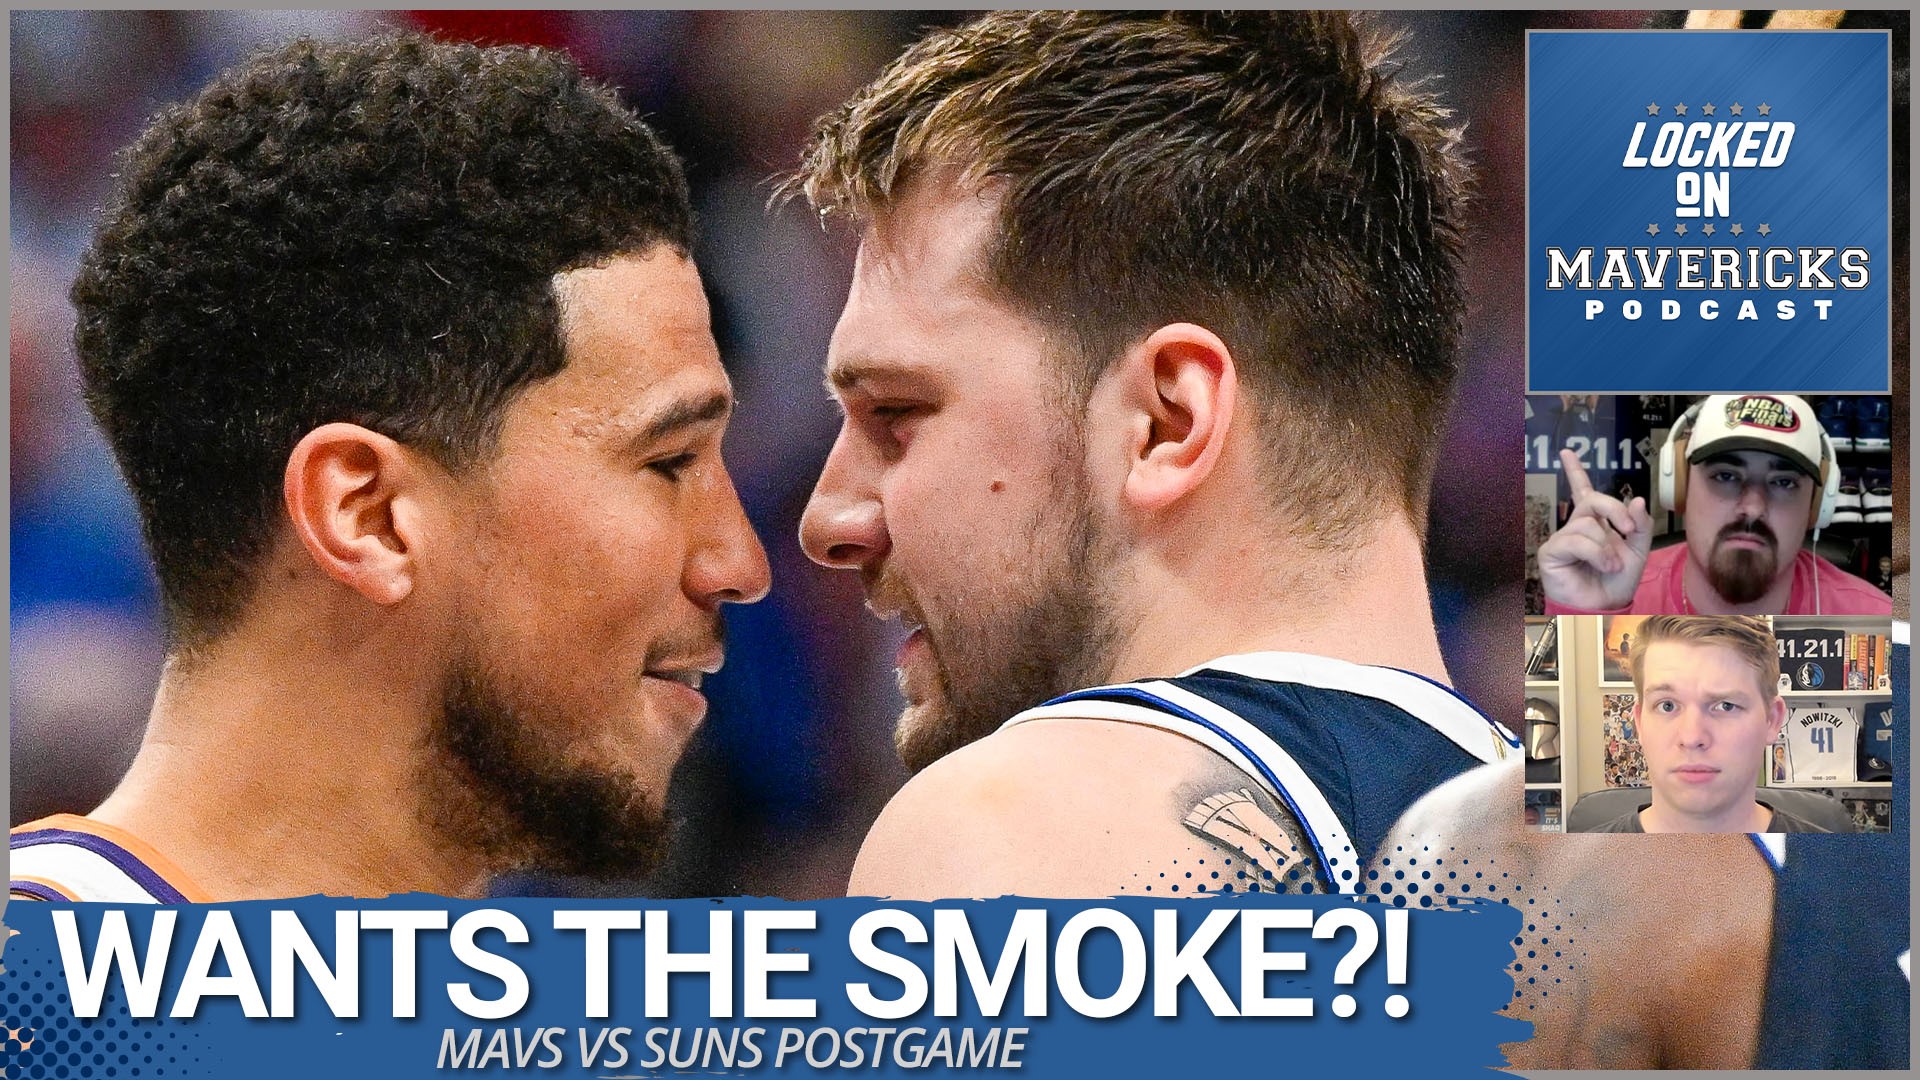 Nick Angstadt & Isaac Harris breakdown the Mavs loss, what was going on with Luka Doncic before and during the game, and what Kyrie Irving contributed.